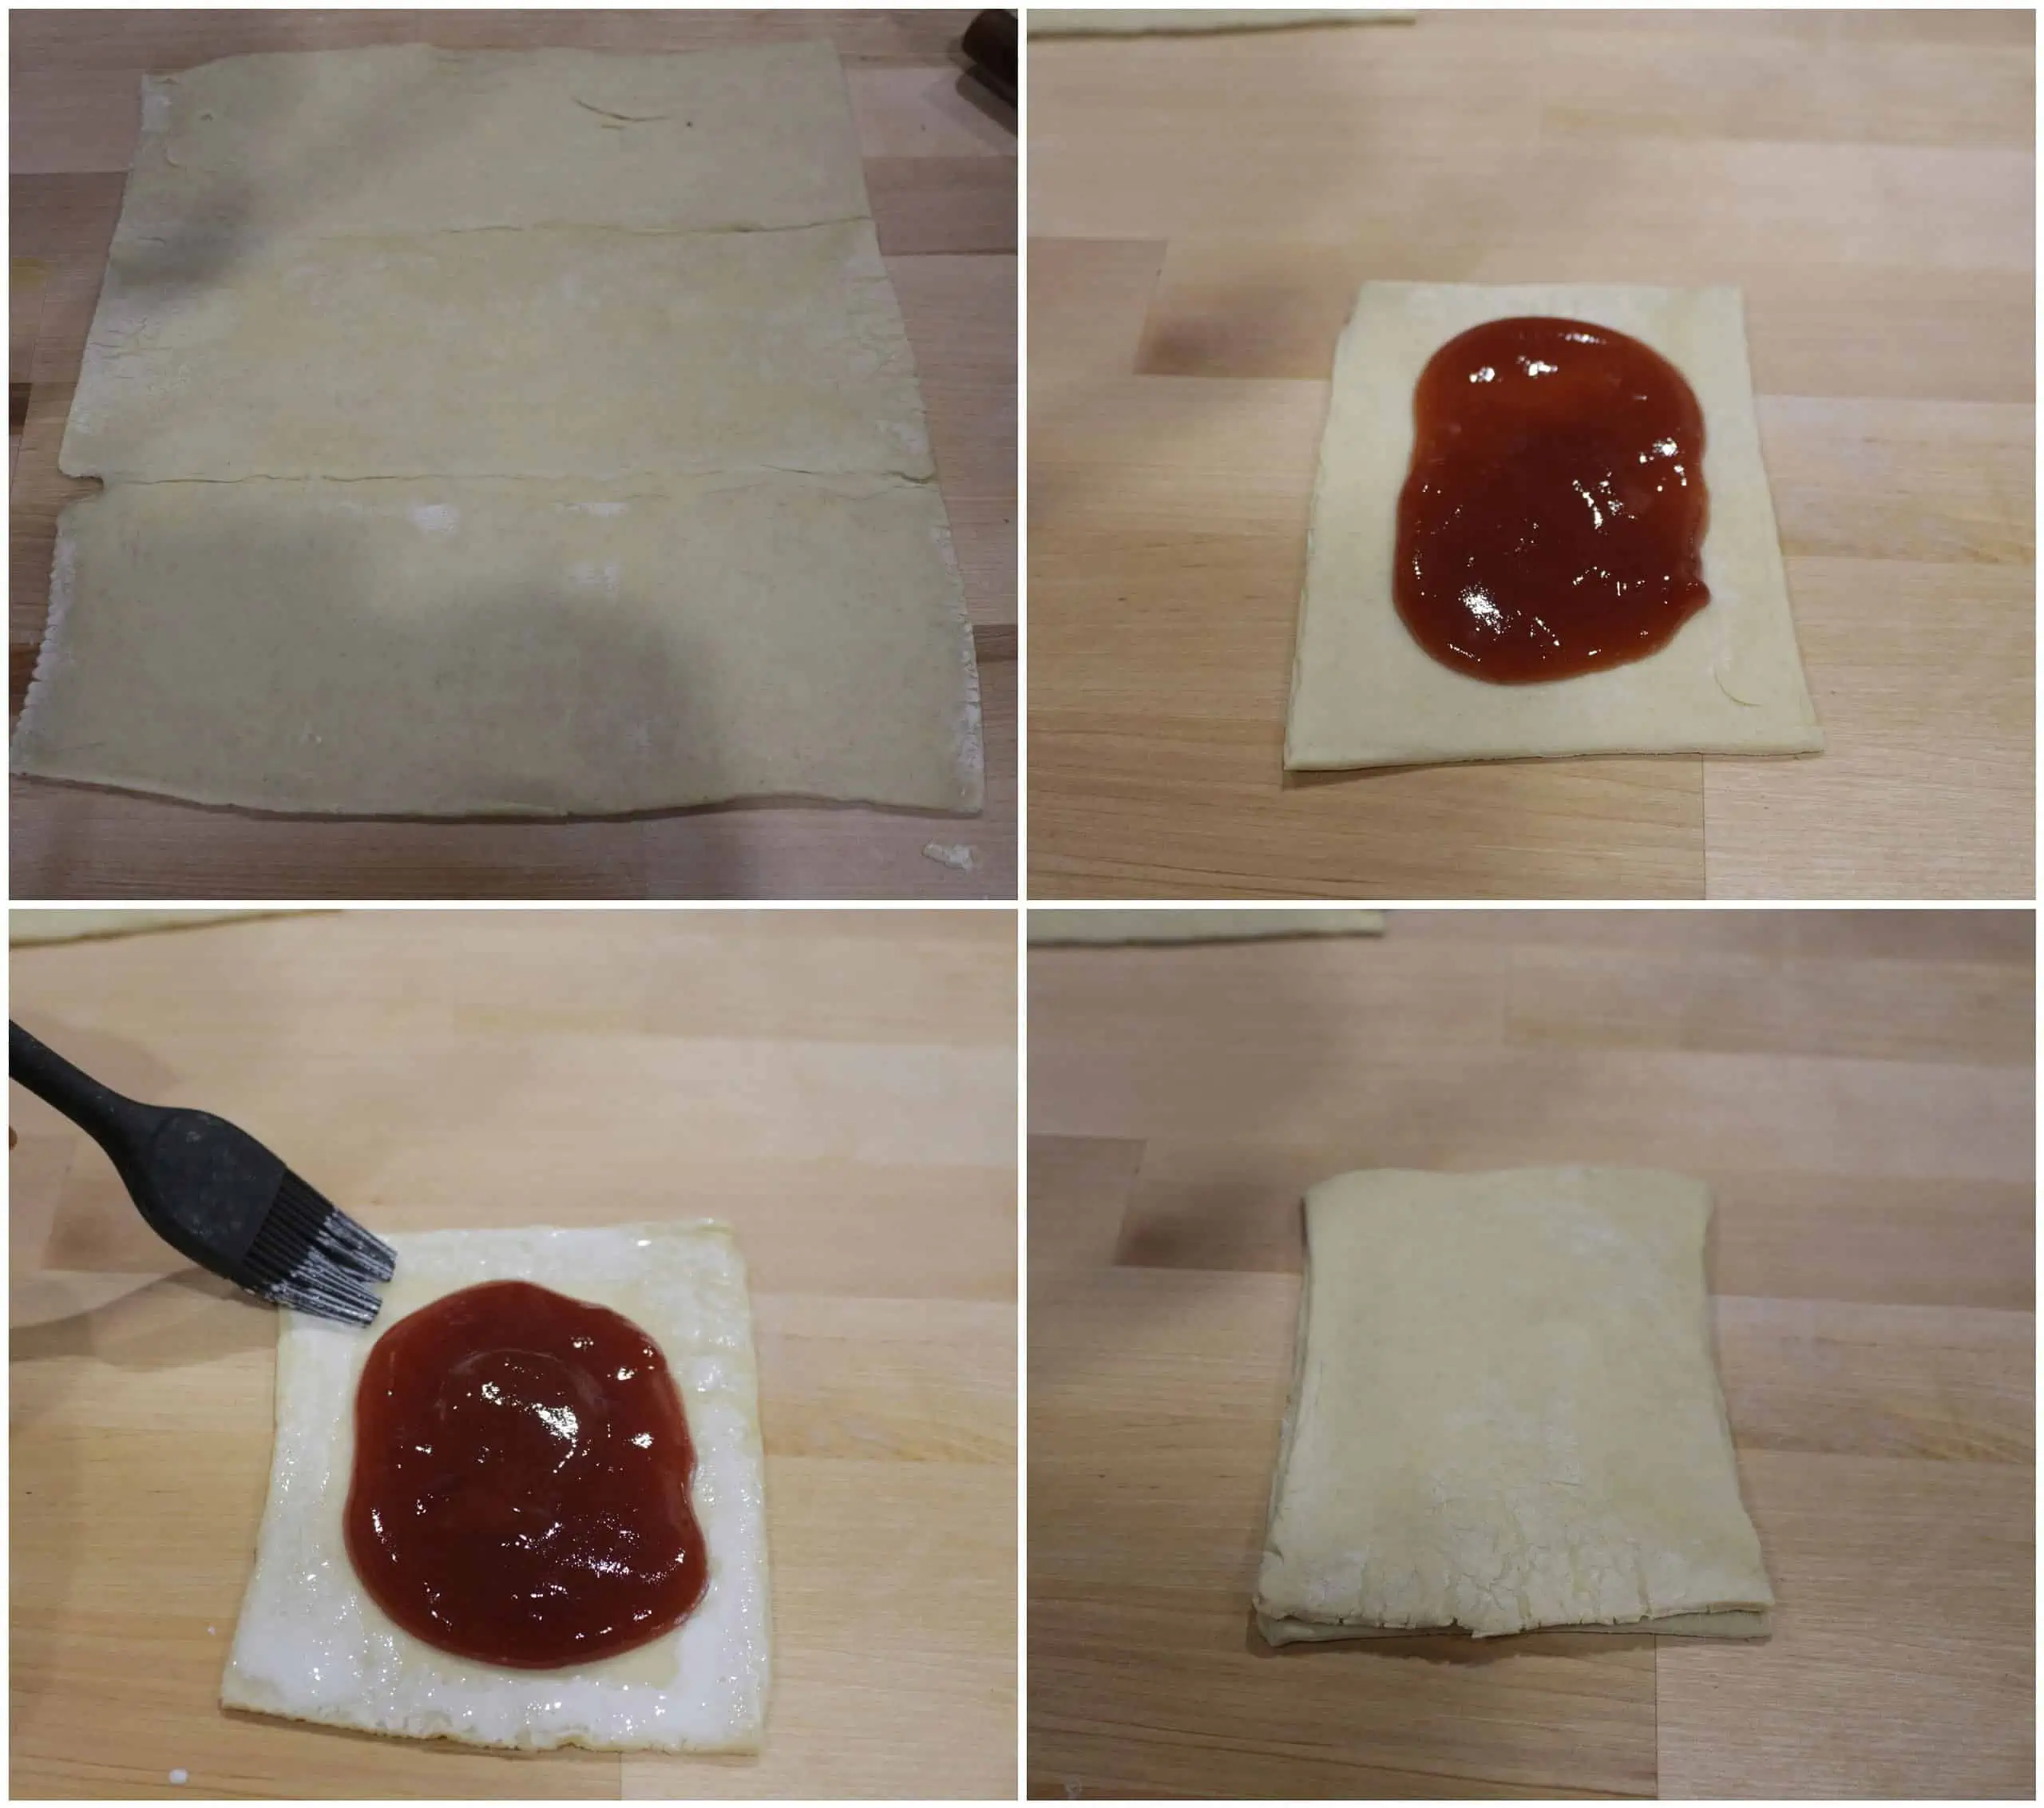 Process shot to shape the puff pastry sheets to make toaster strudels.